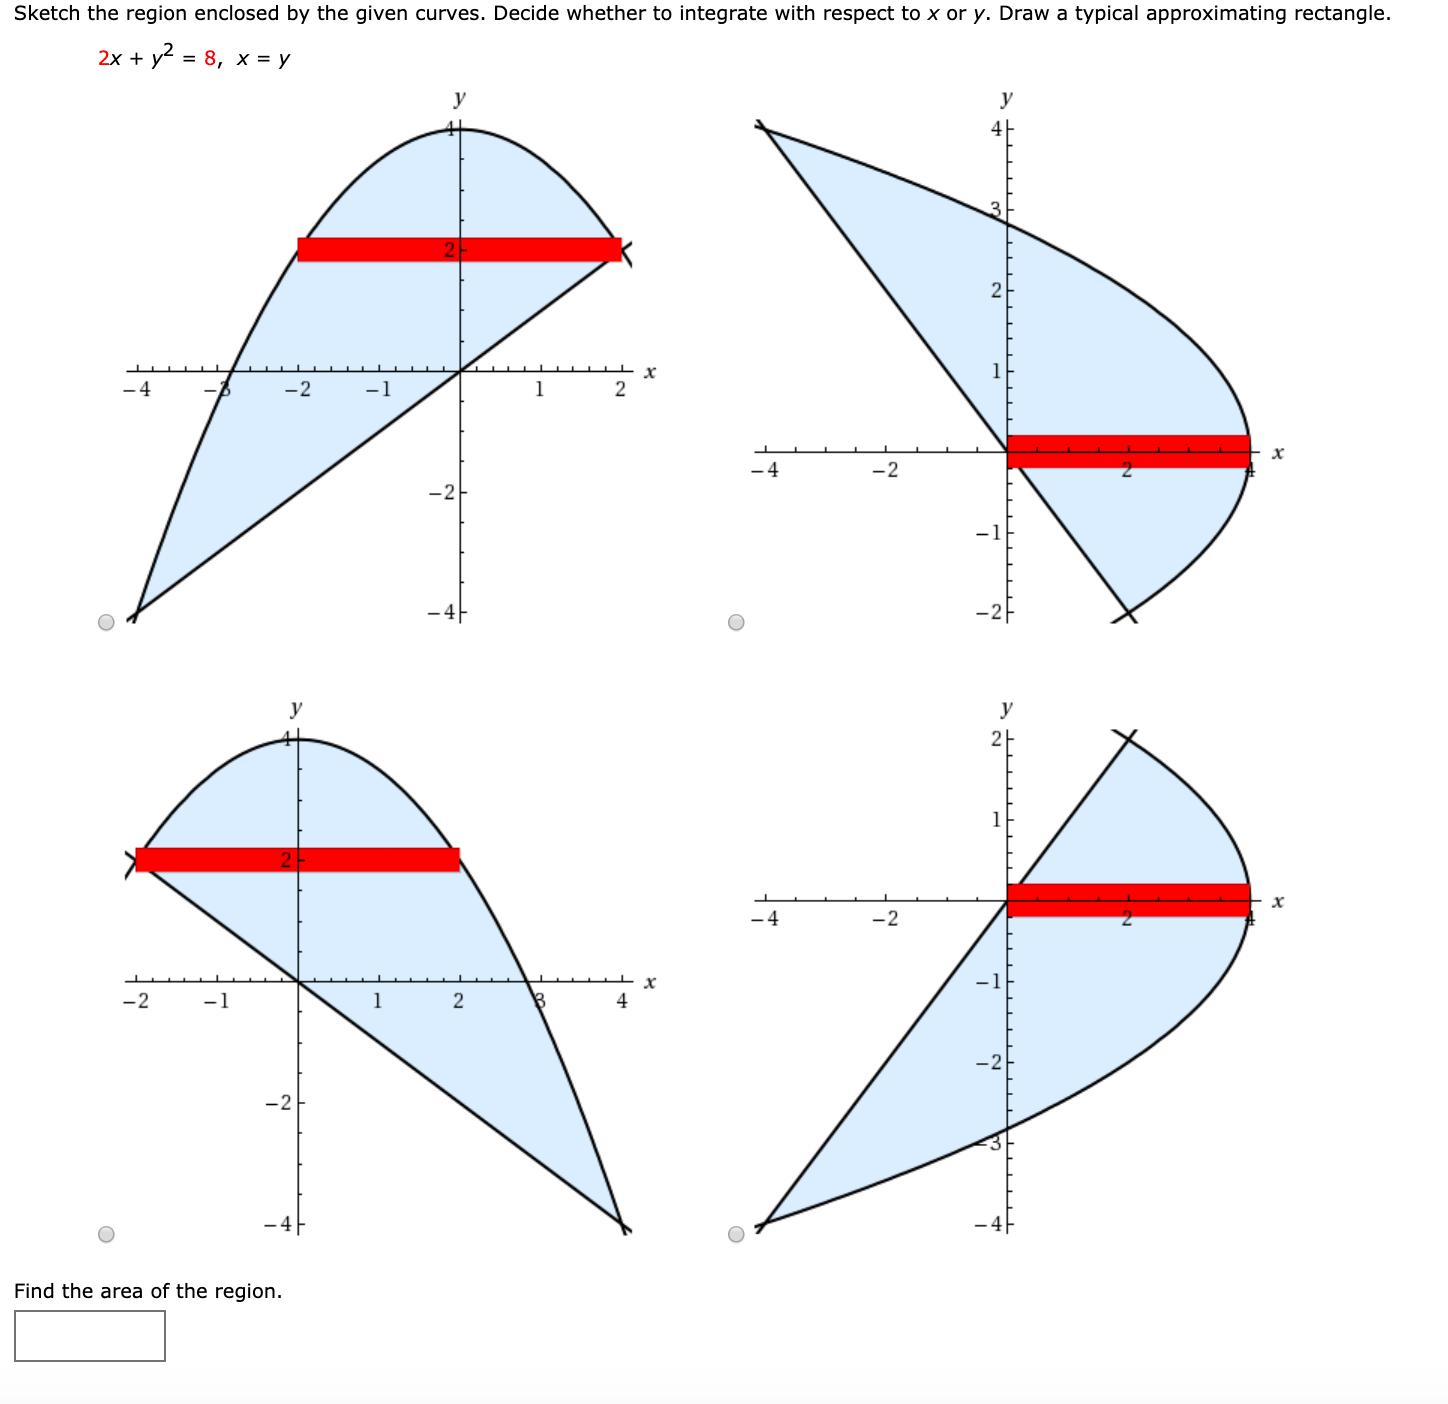 Sketch the region enclosed by the given curves. Decide whether to integrate with respect to x or y. Draw a typical approximating rectangle.
2x + y2 = 8, x = y
2
-4
-2
-1
-4
-2
2E
4
-2
-1
1.
-2
